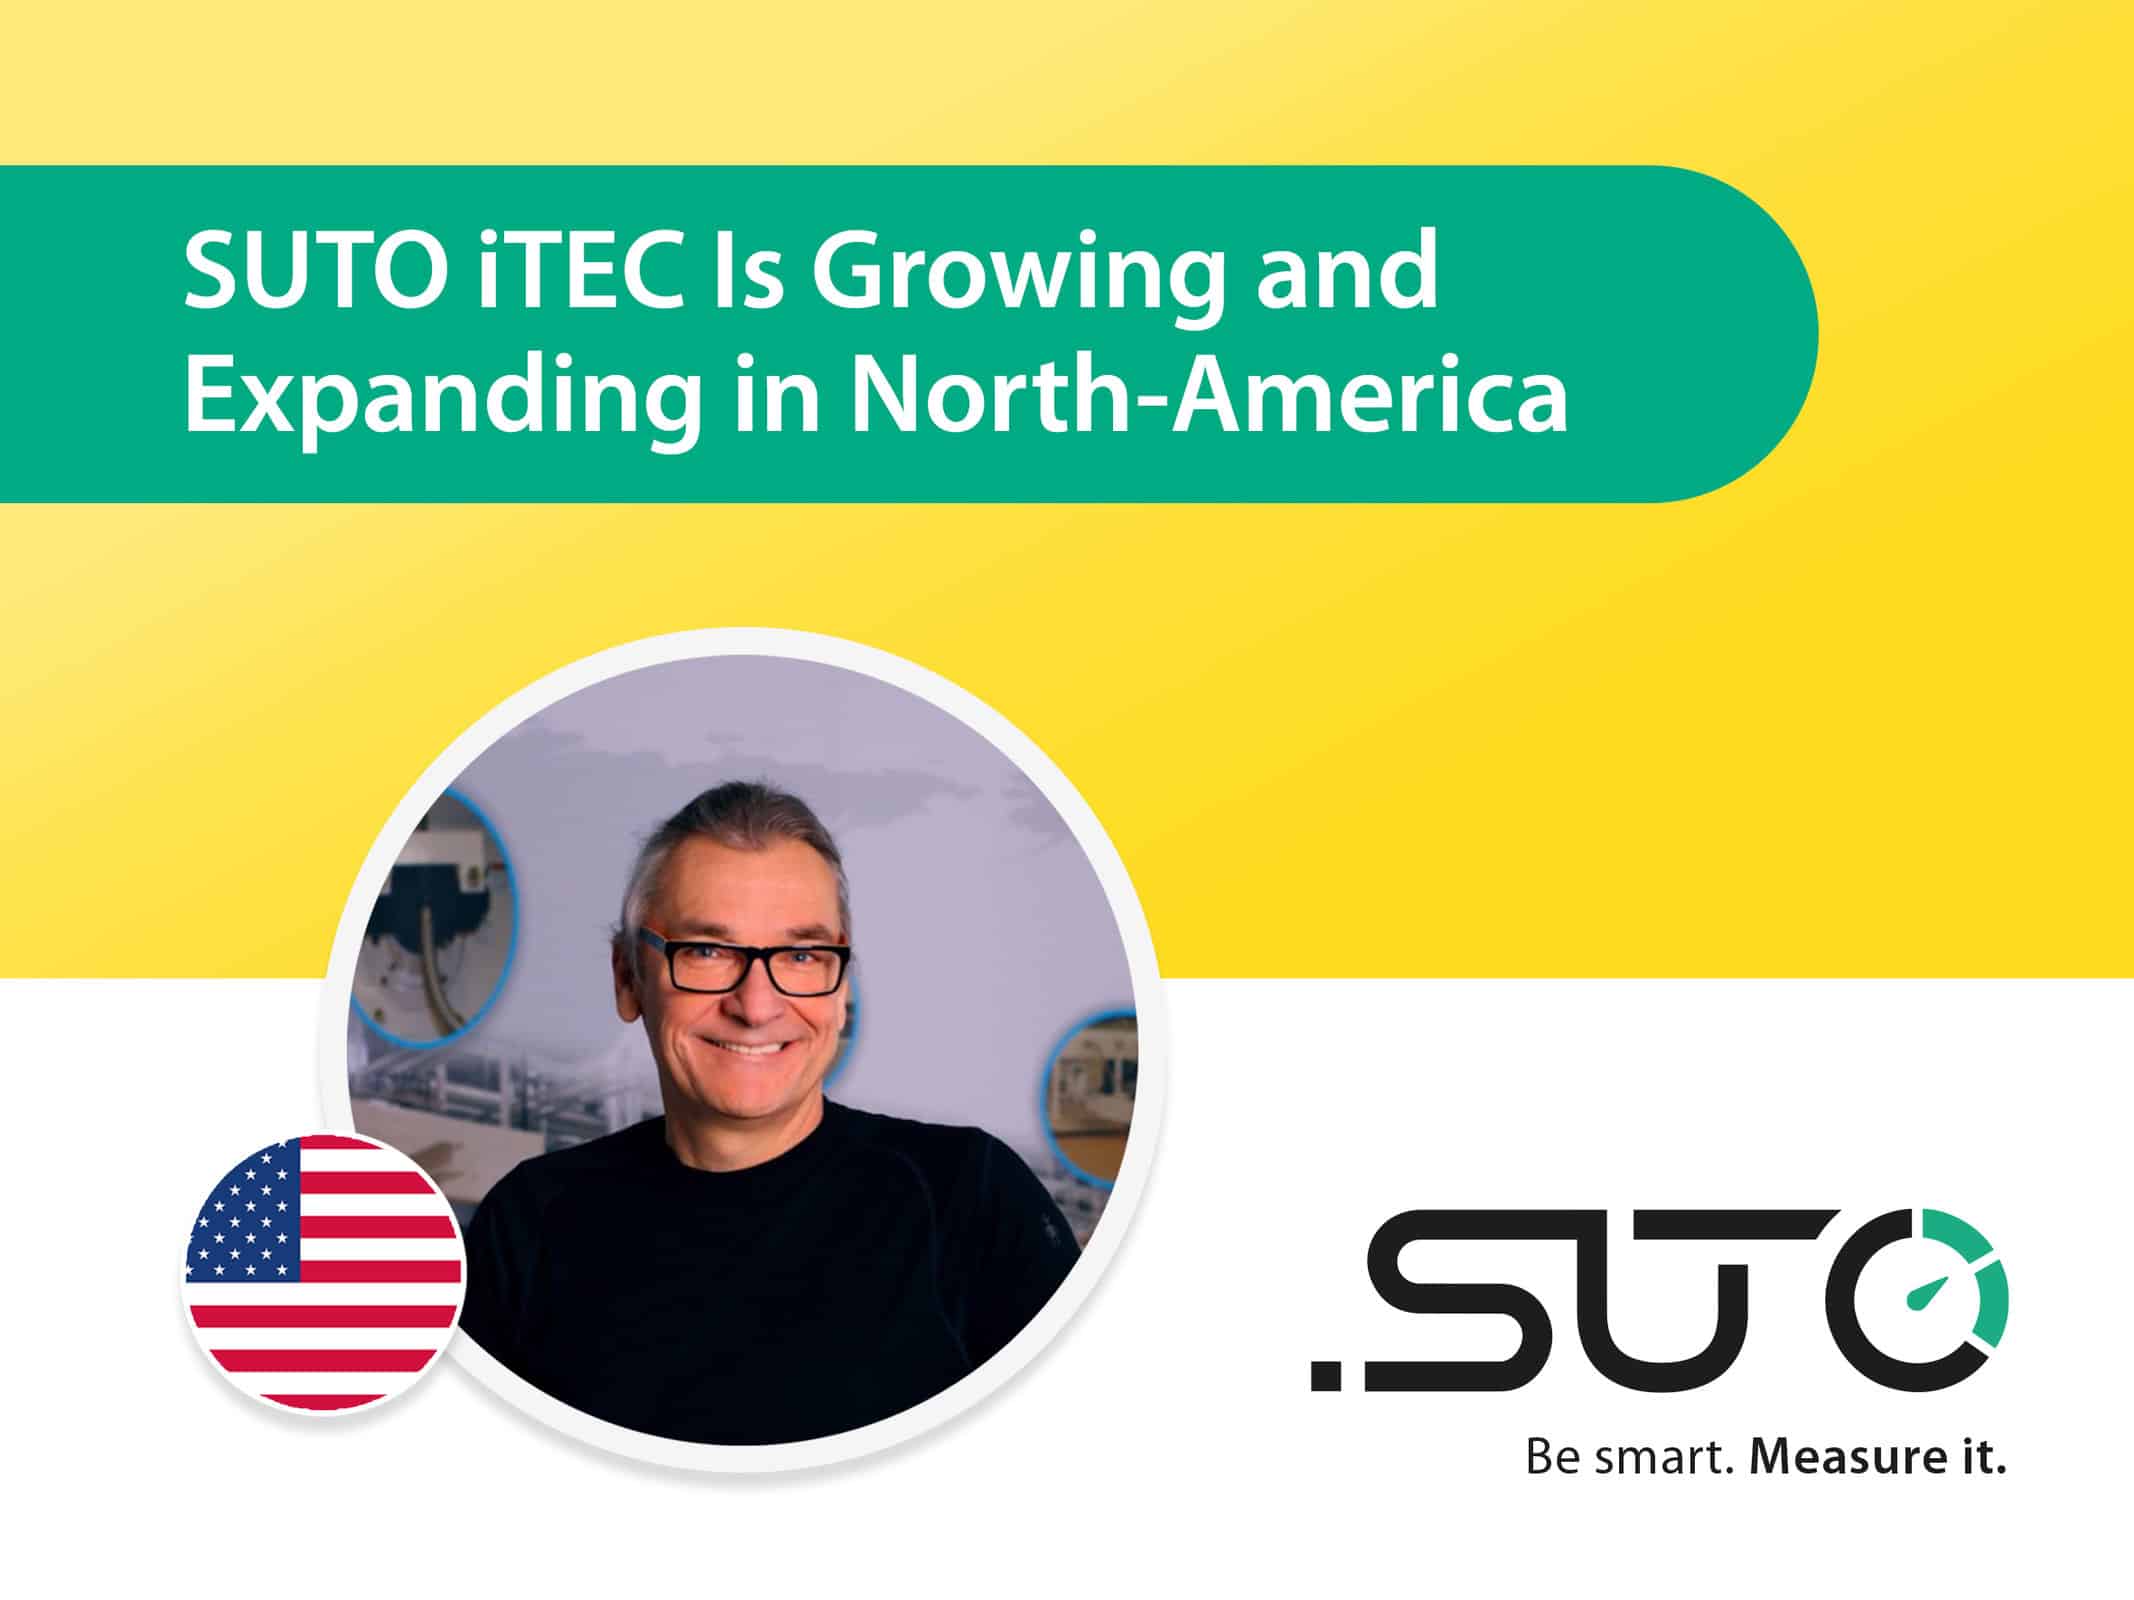 SUTO ITEC IS GROWING AND EXPANDING IN NORTH-AMERICA